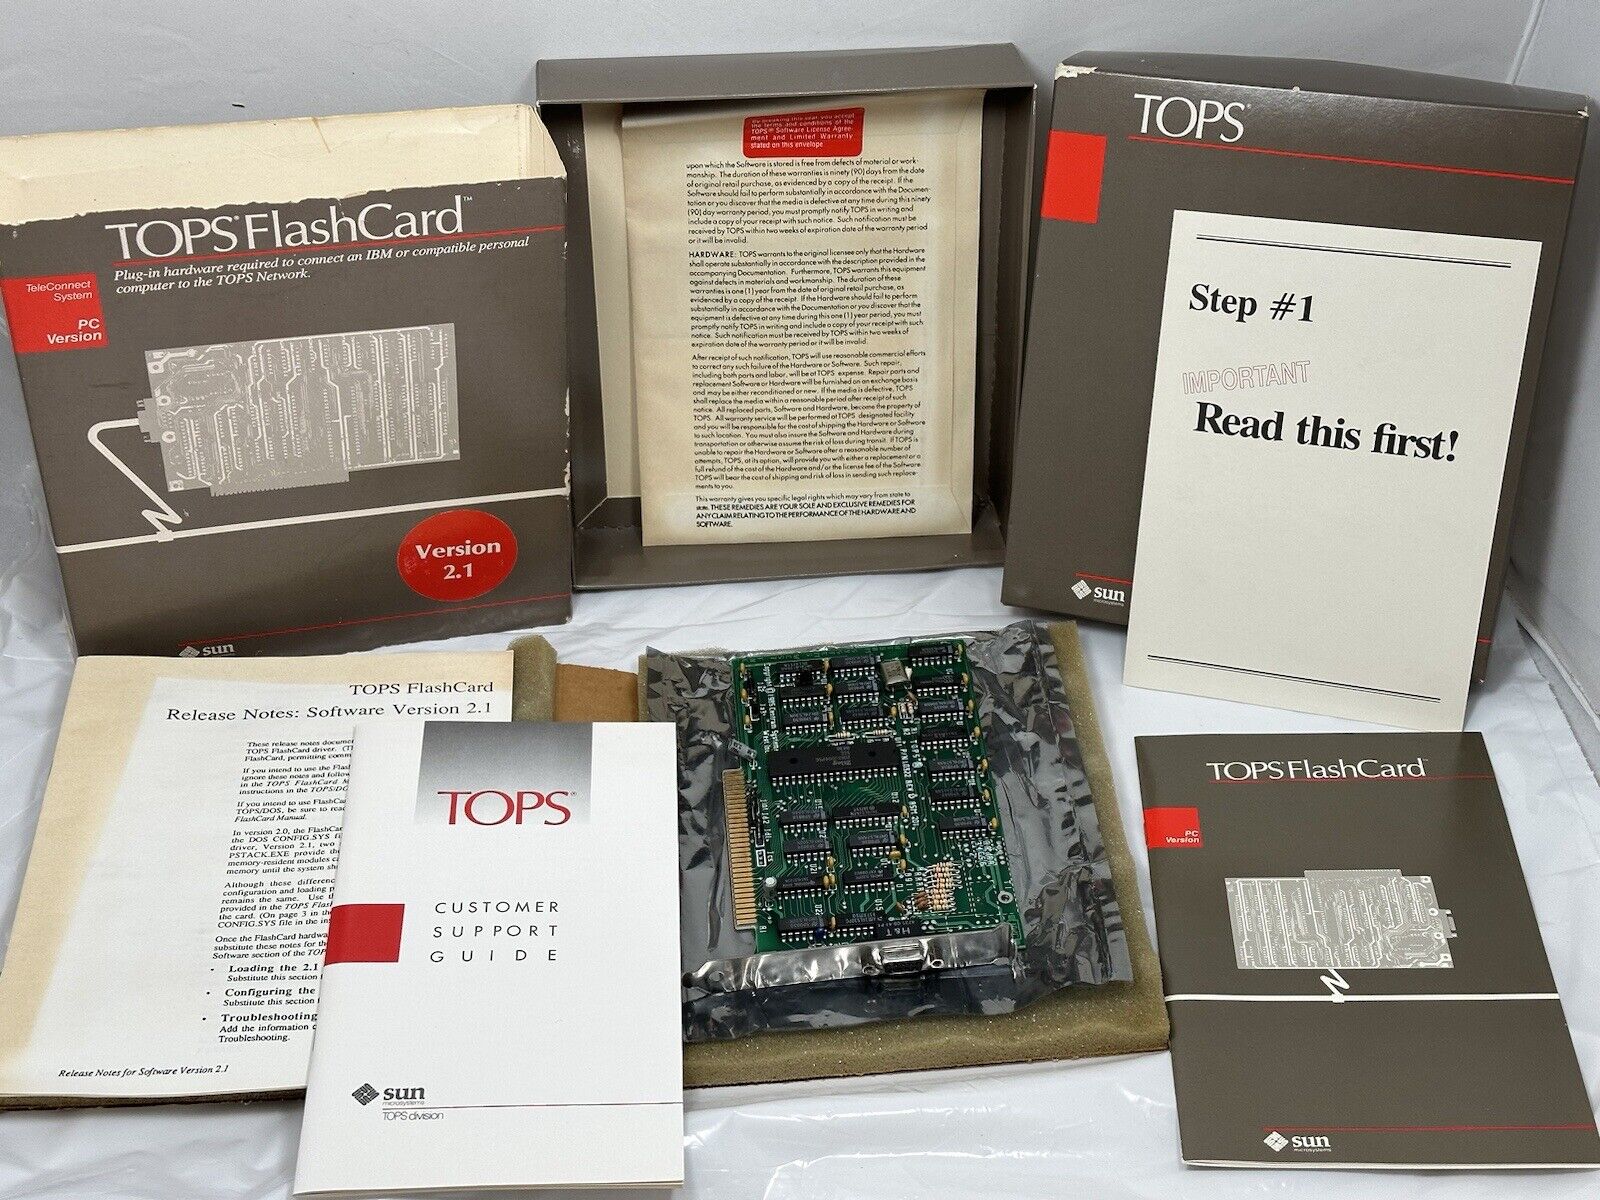 Vintage TOPS FlashCard Plug-in Card, Disk, Manual & Box by Sun Microsystems v2.1